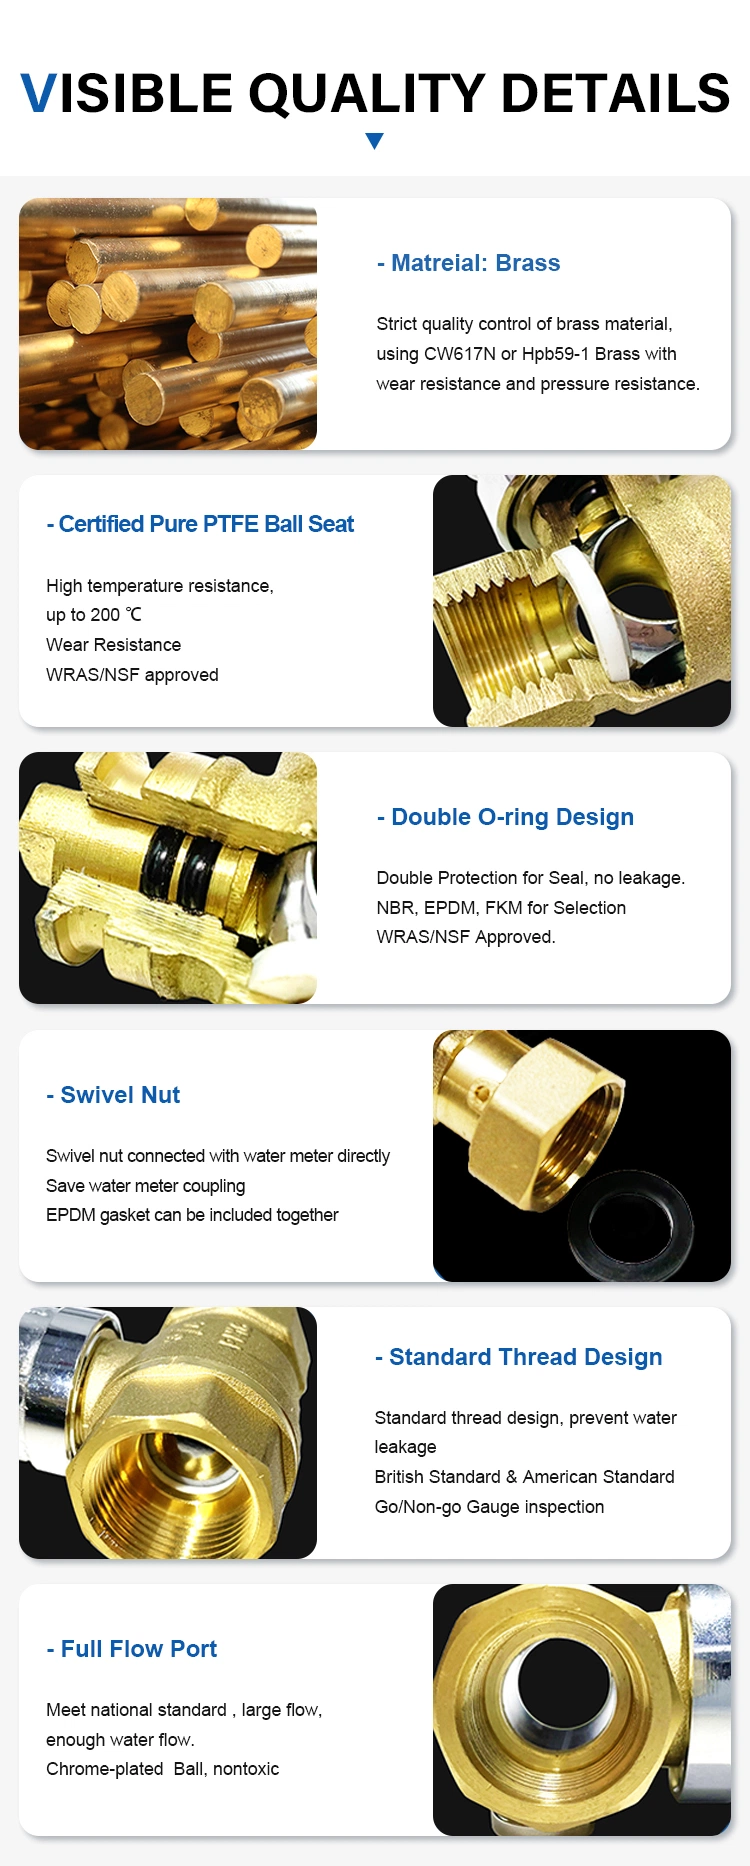 Cw617n Dzr Brass Inviolable Magnetic Lockable Ball Valve